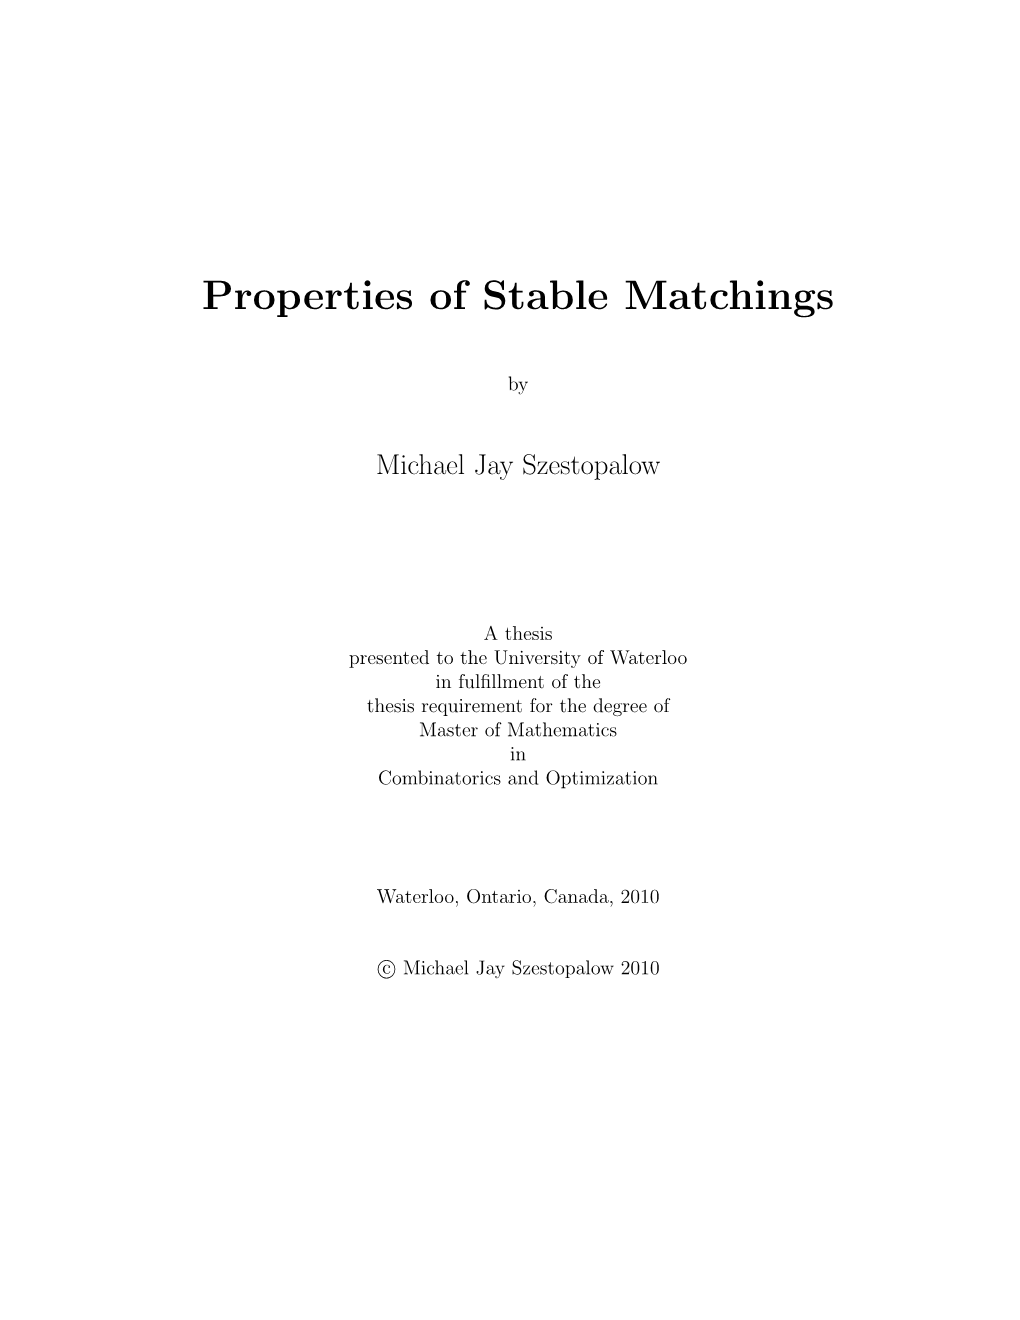 Properties of Stable Matchings